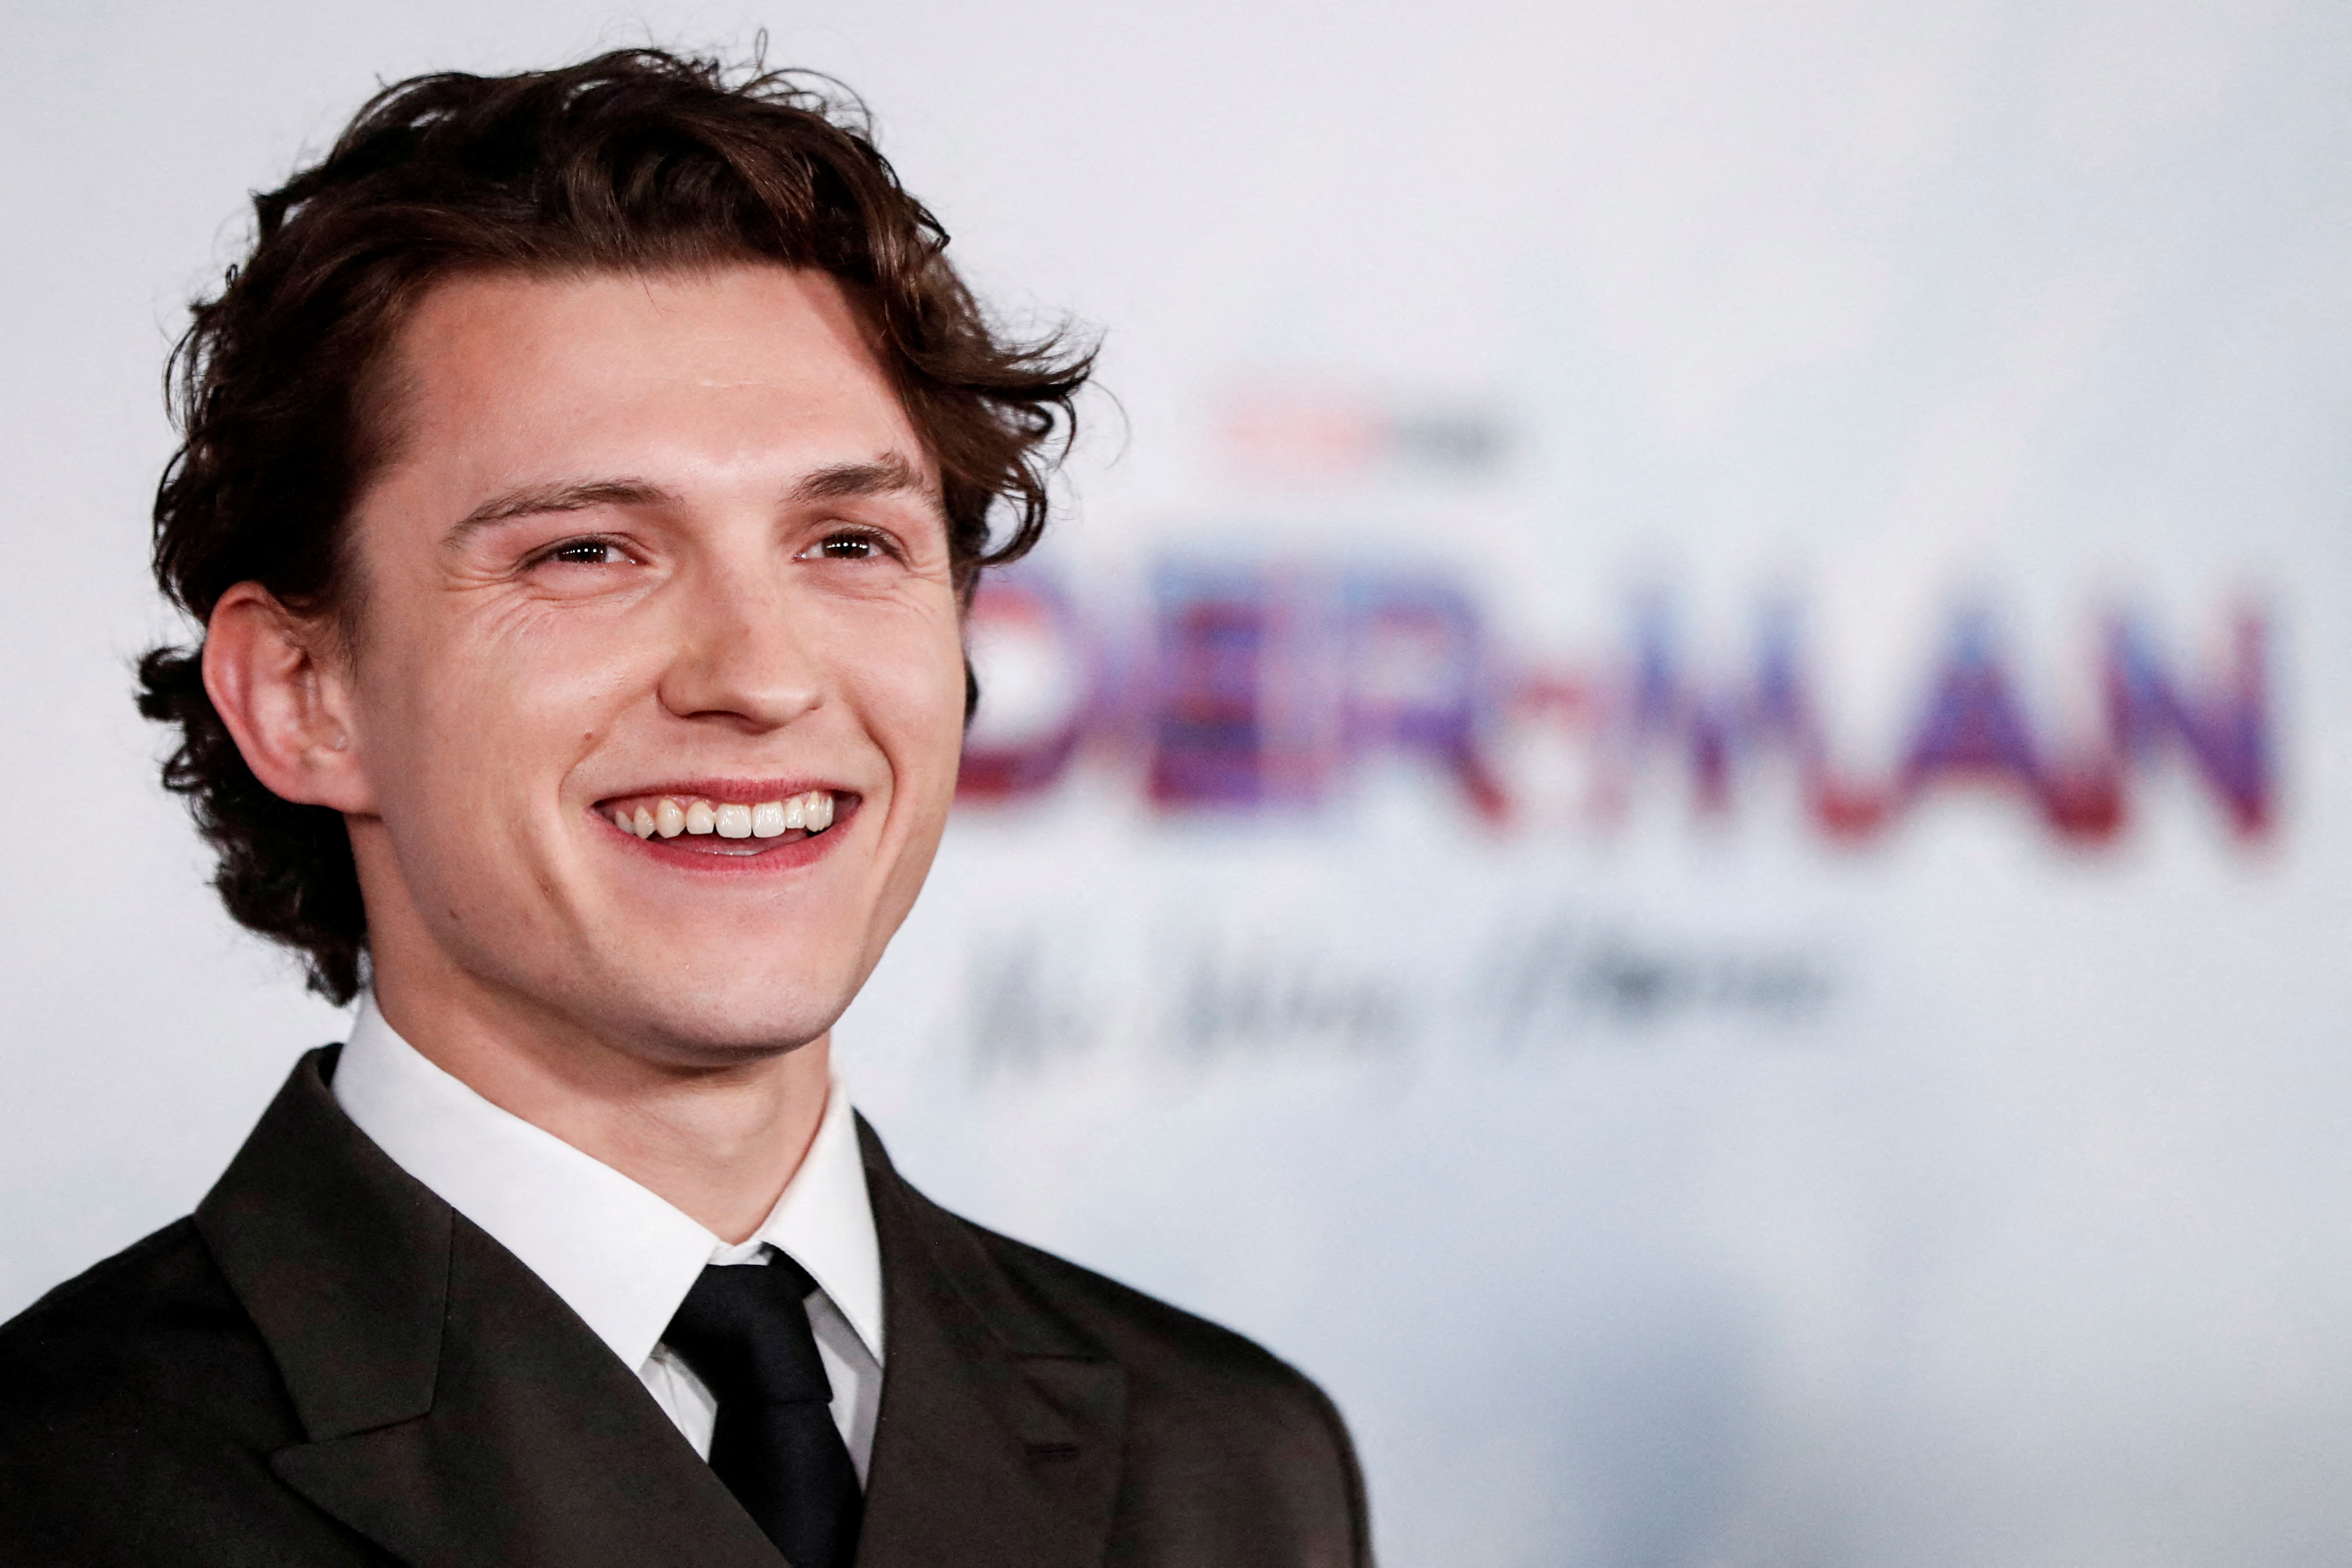 FILE PHOTO: Cast member Tom Holland attends the premiere for the film Spider-Man: No Way Home in Los Angeles, California, December 13, 2021. REUTERS/Mario Anzuoni/File Photo